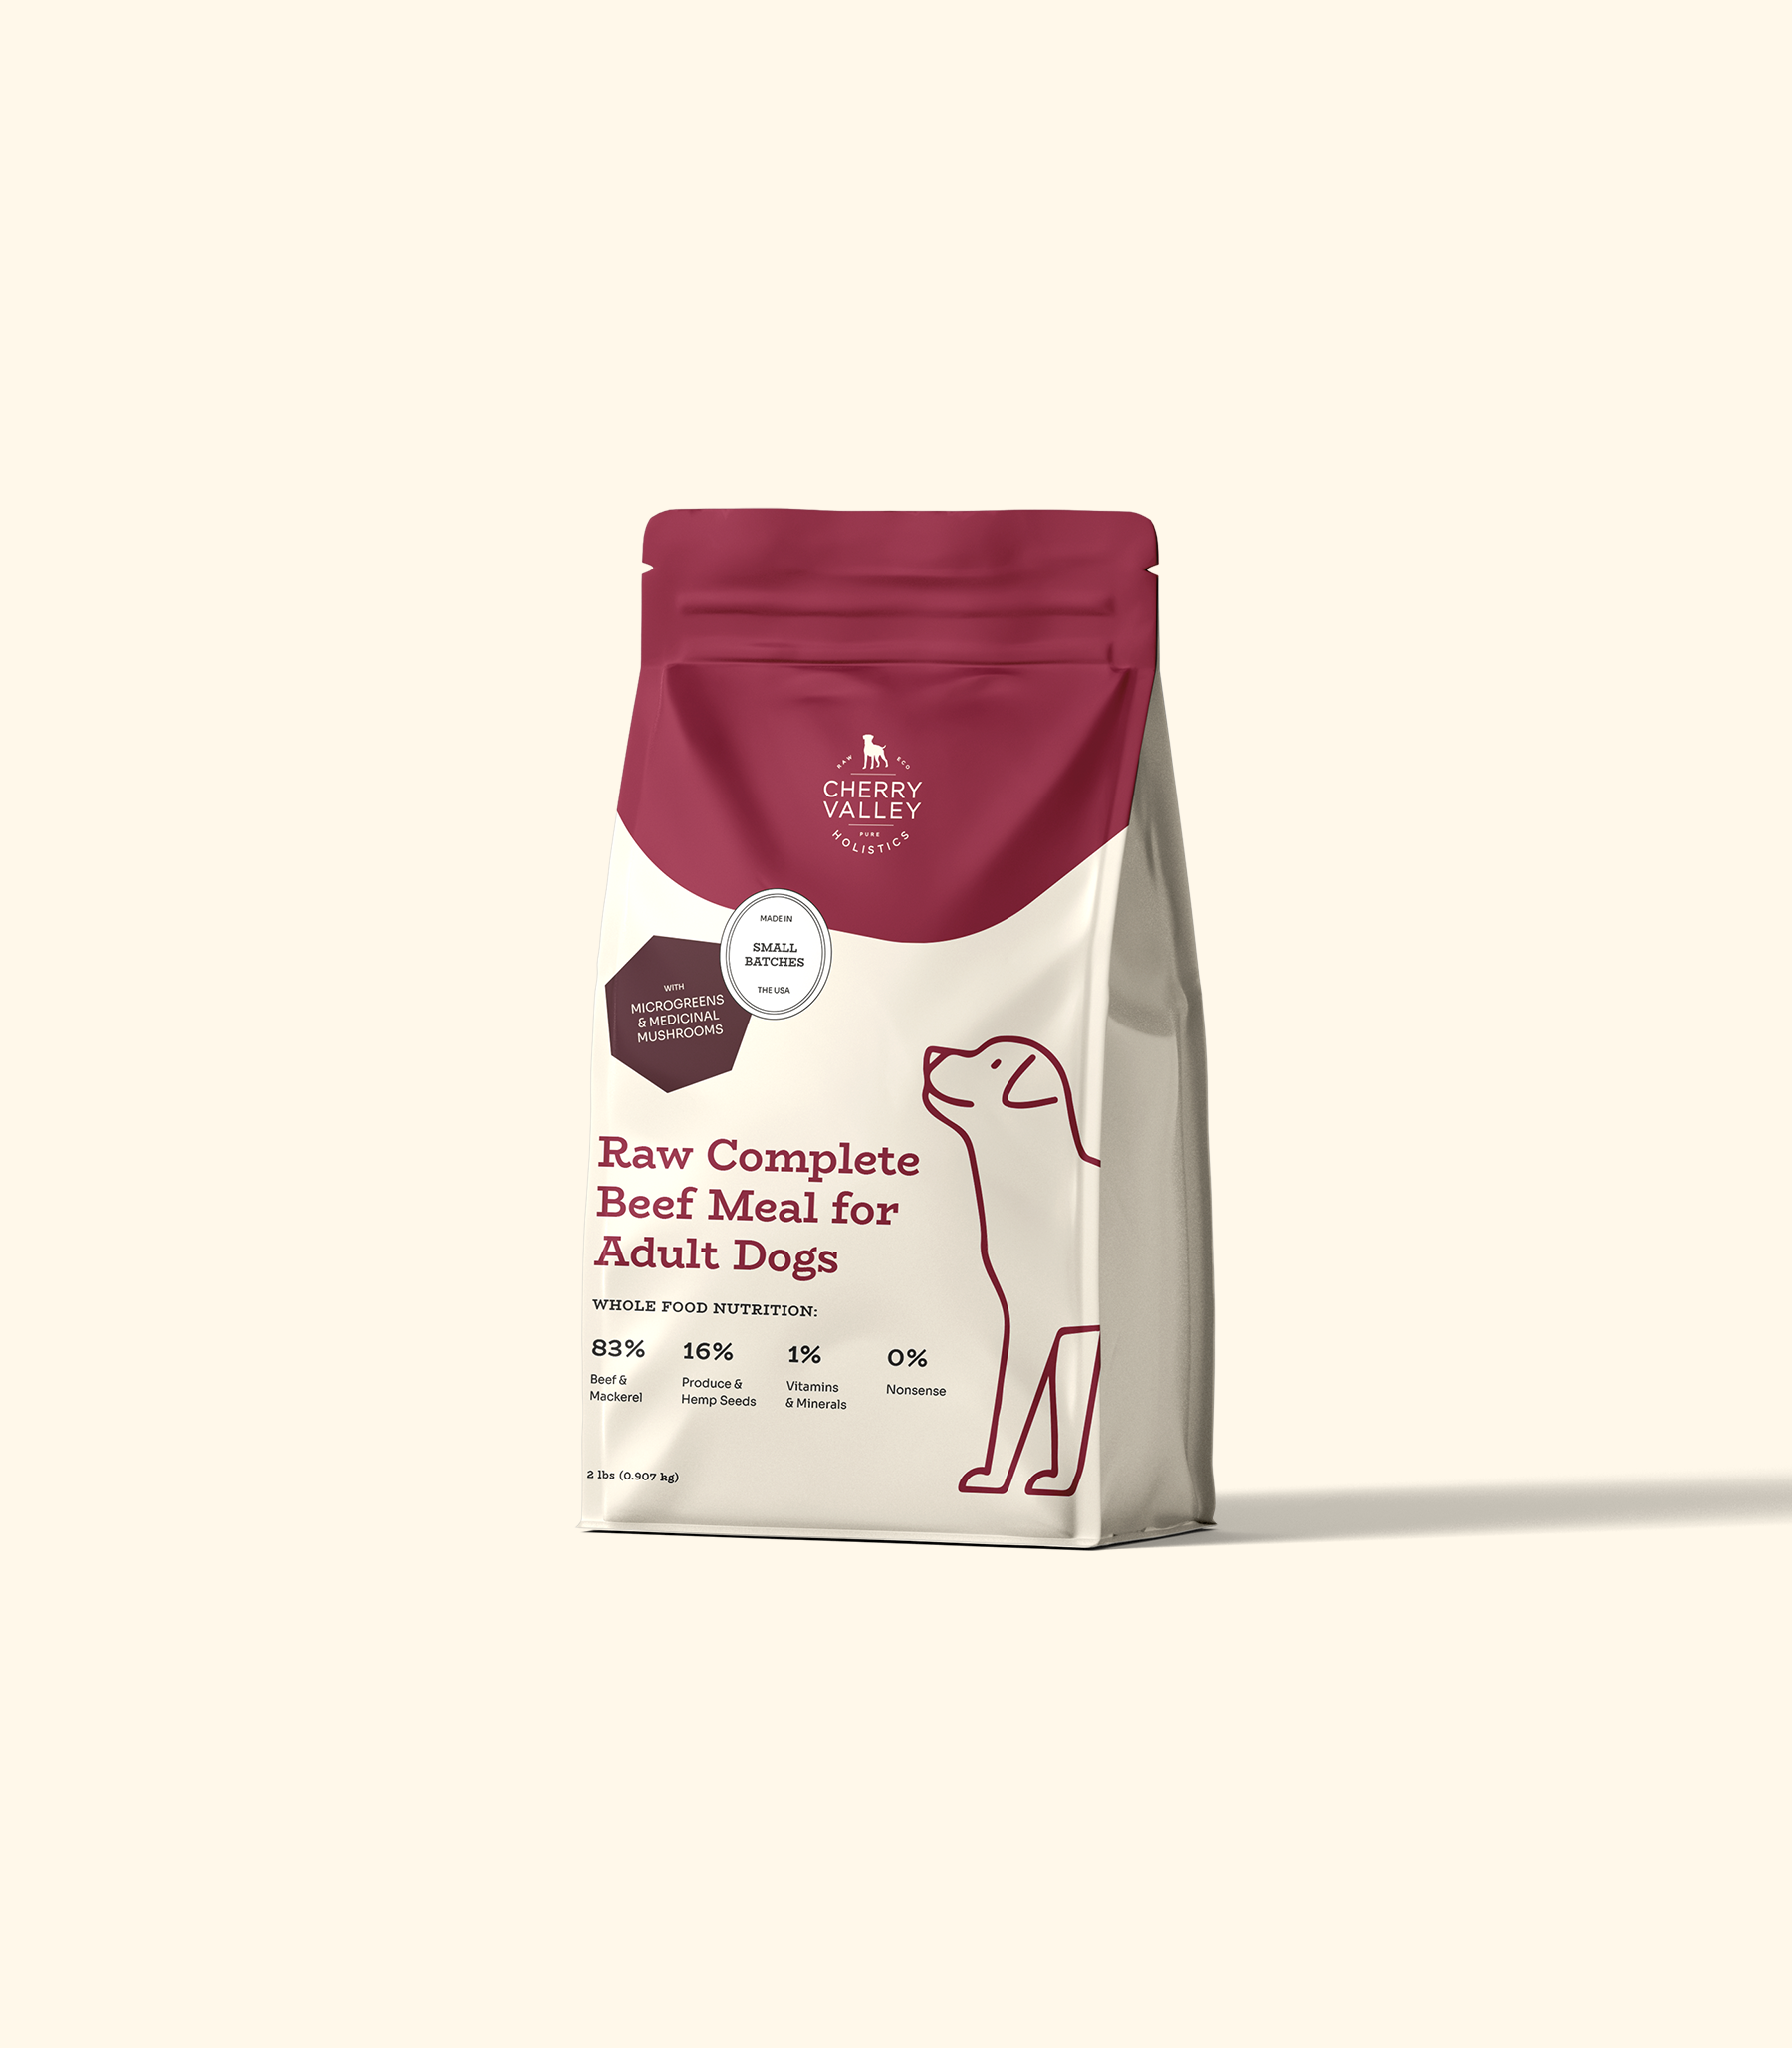 Raw Complete Beef Meal for Adult Dogs